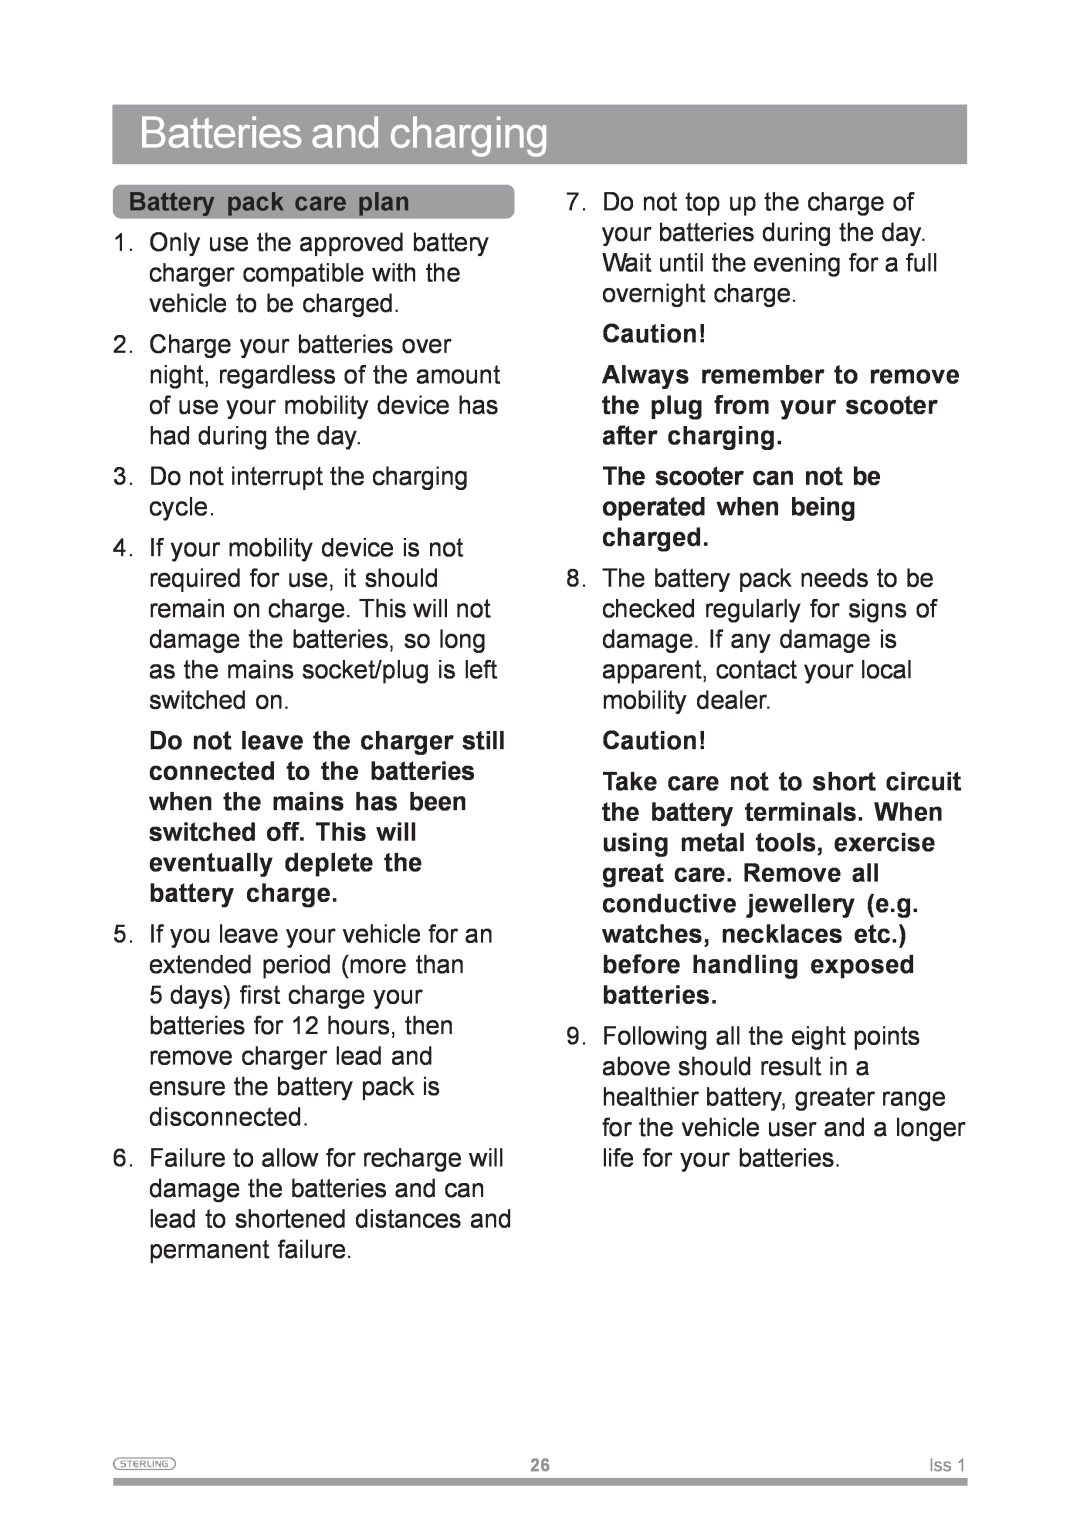 Sunrise Medical Mobility Scooter owner manual Battery pack care plan, The scooter can not be operated when being charged 